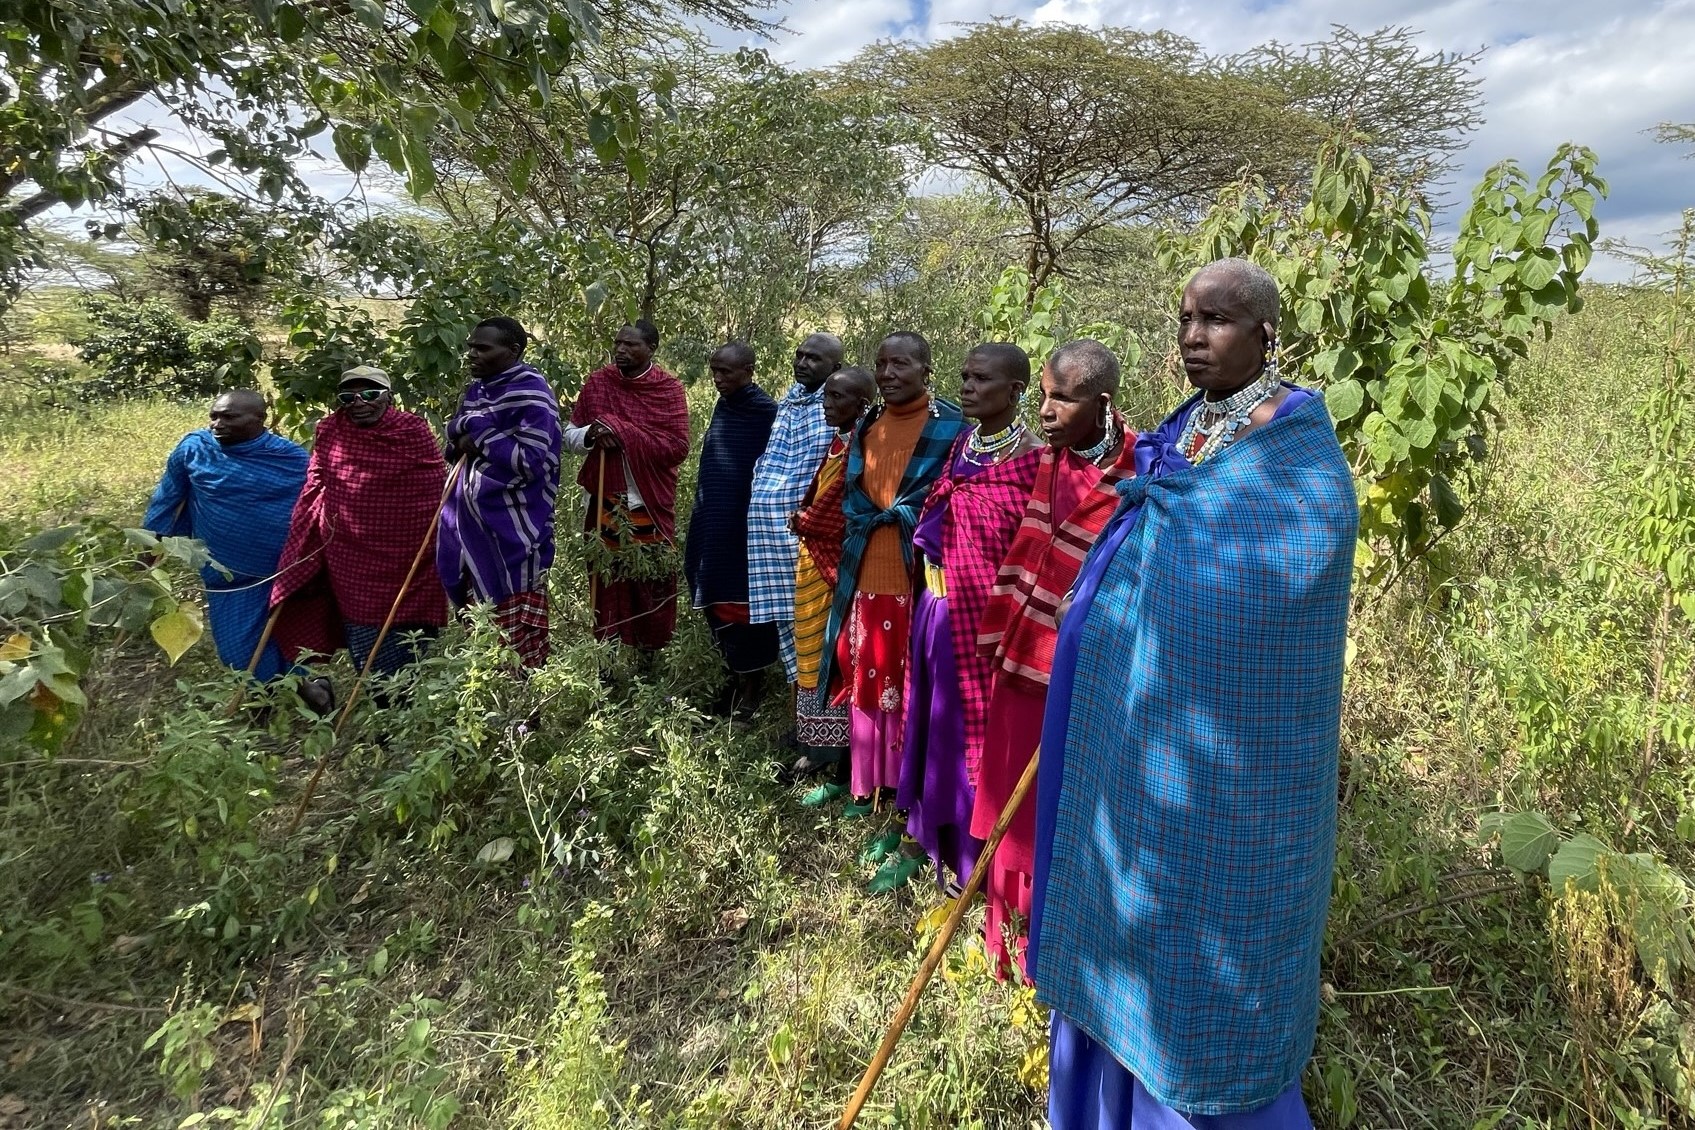 A group of Maasai women and men in traditional Maasai clothing and jewelry